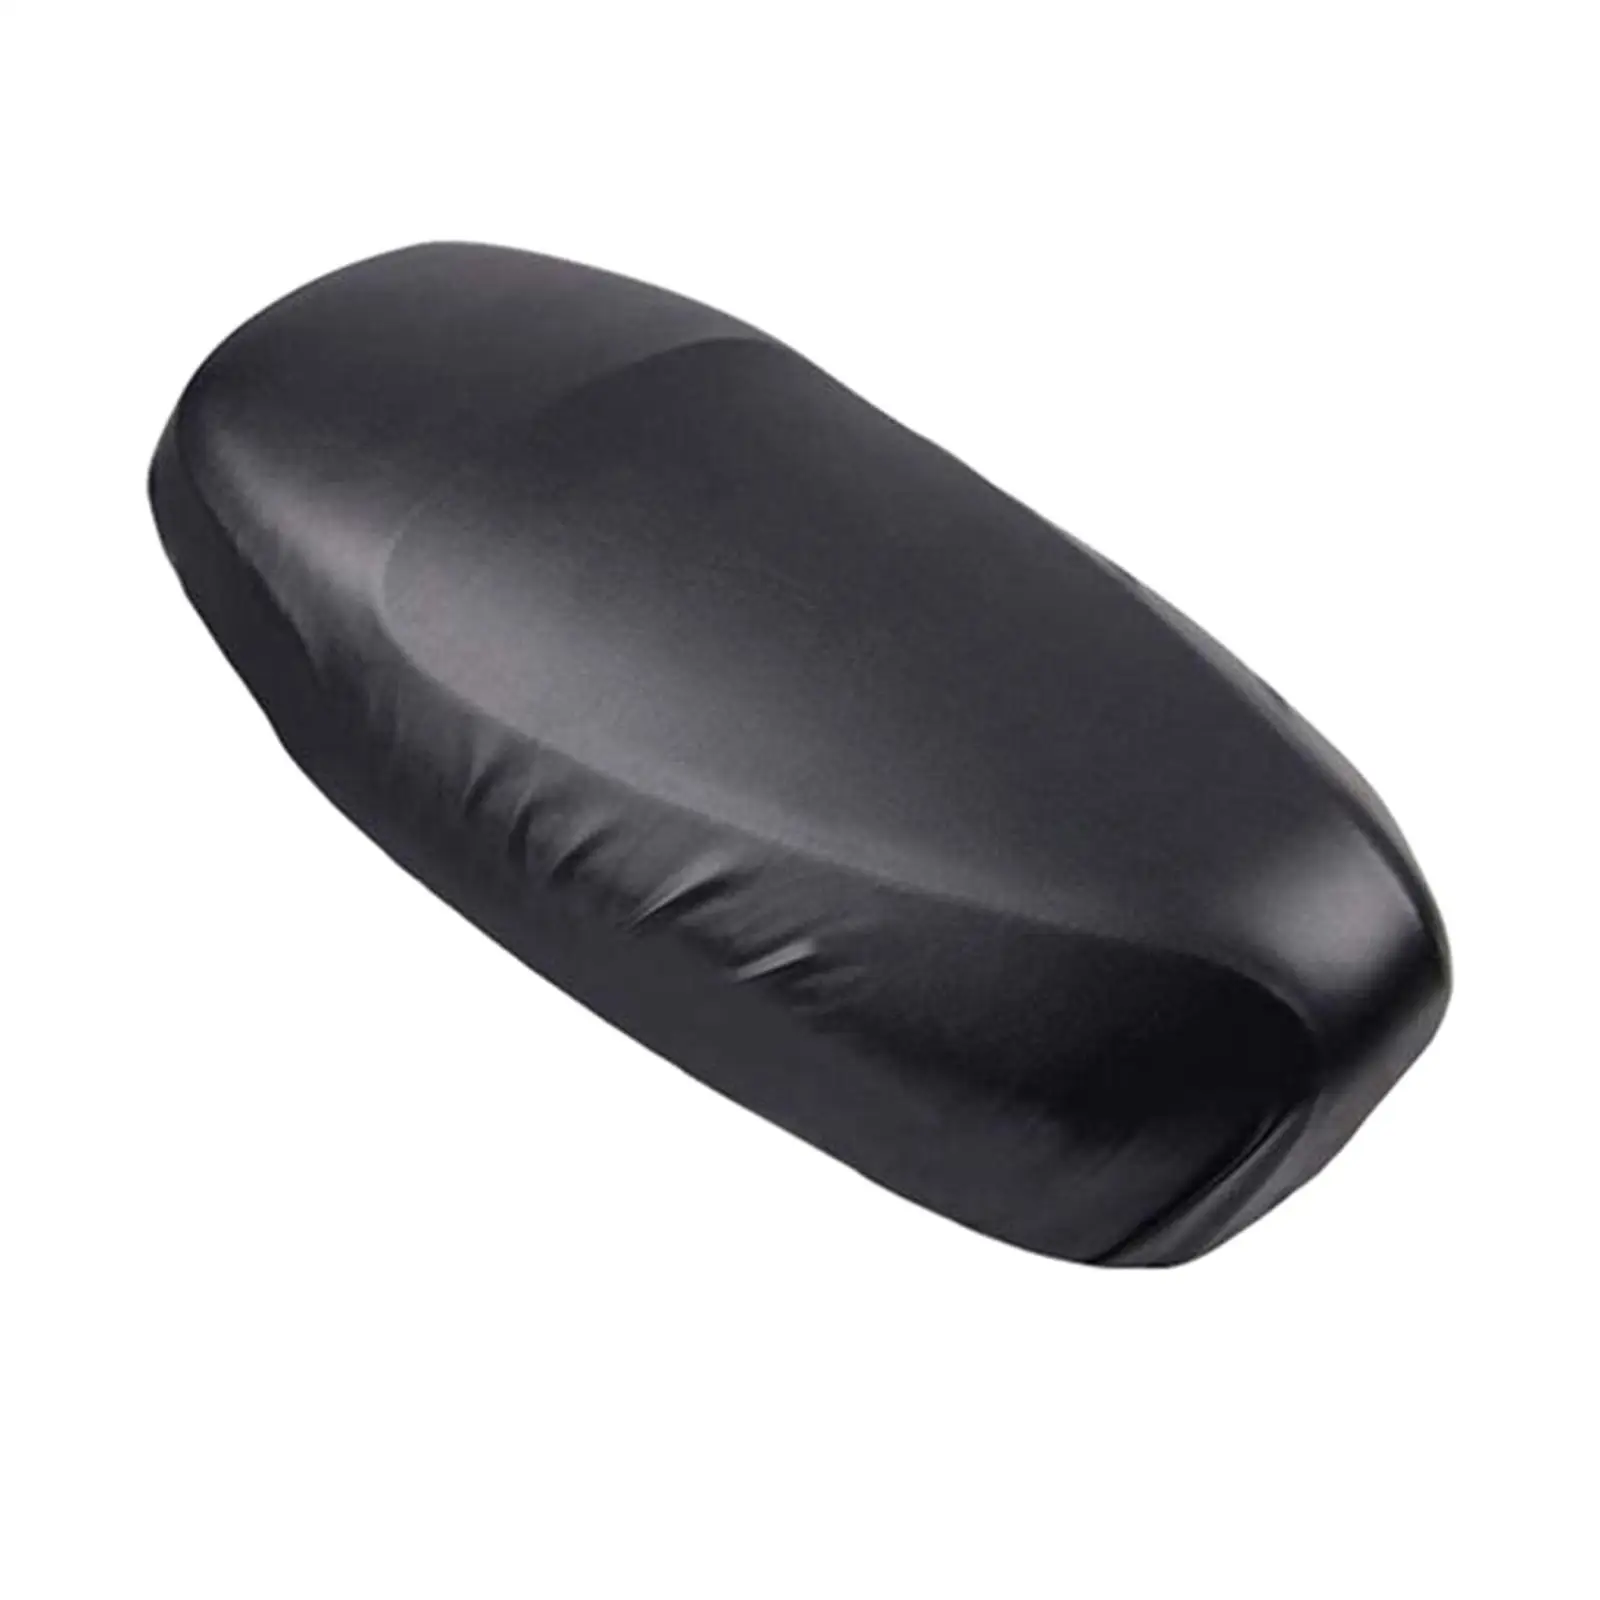 Motorcycle Seat Cushion Cover Seat Protector Cover for Outdoor